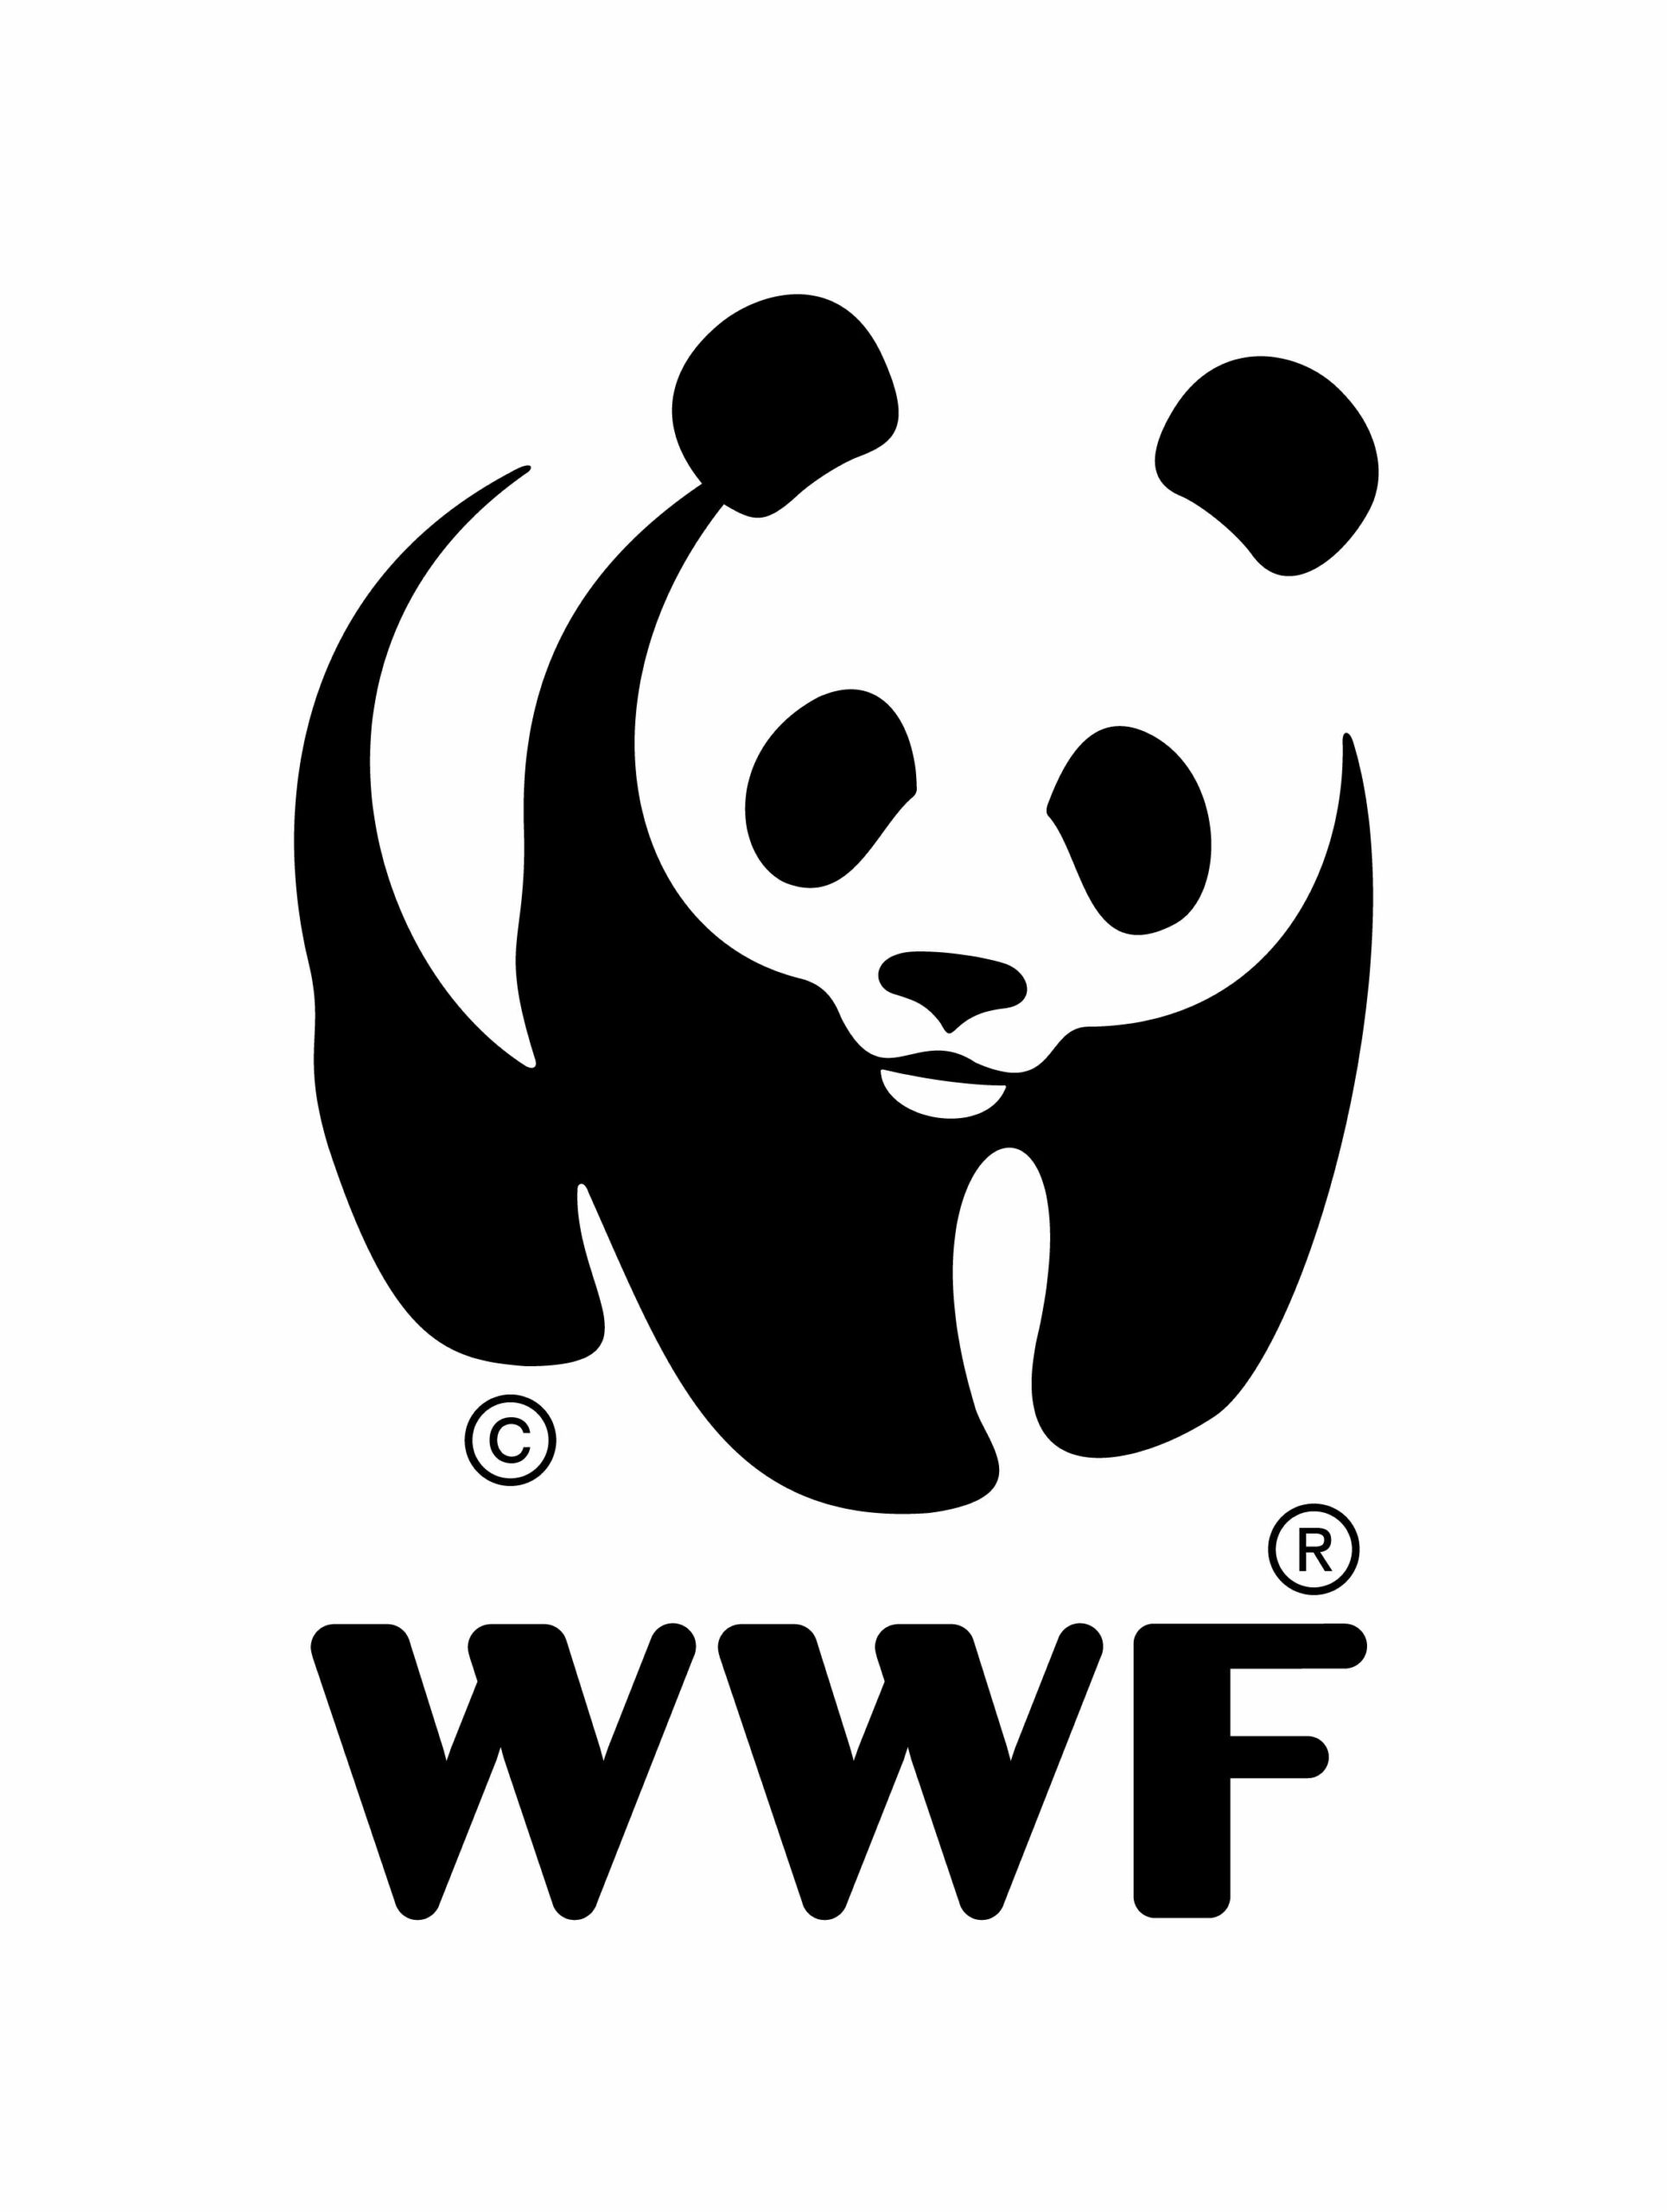 WWF fails to communicate clearly and consistently